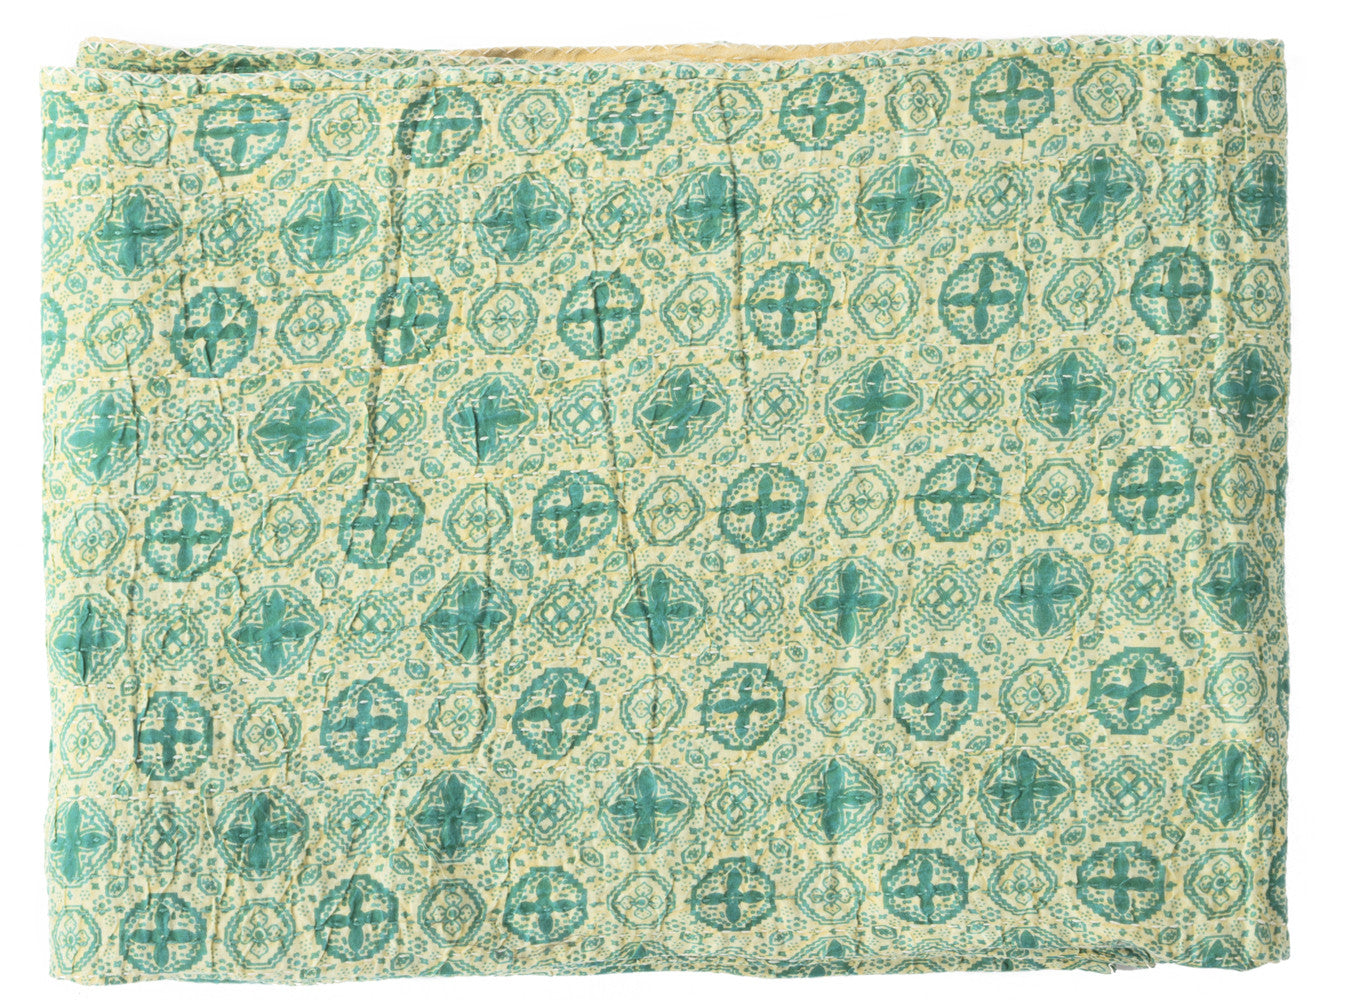 50" X 70" Green and Ivory Kantha Cotton Geometric Throw Blanket with Embroidery